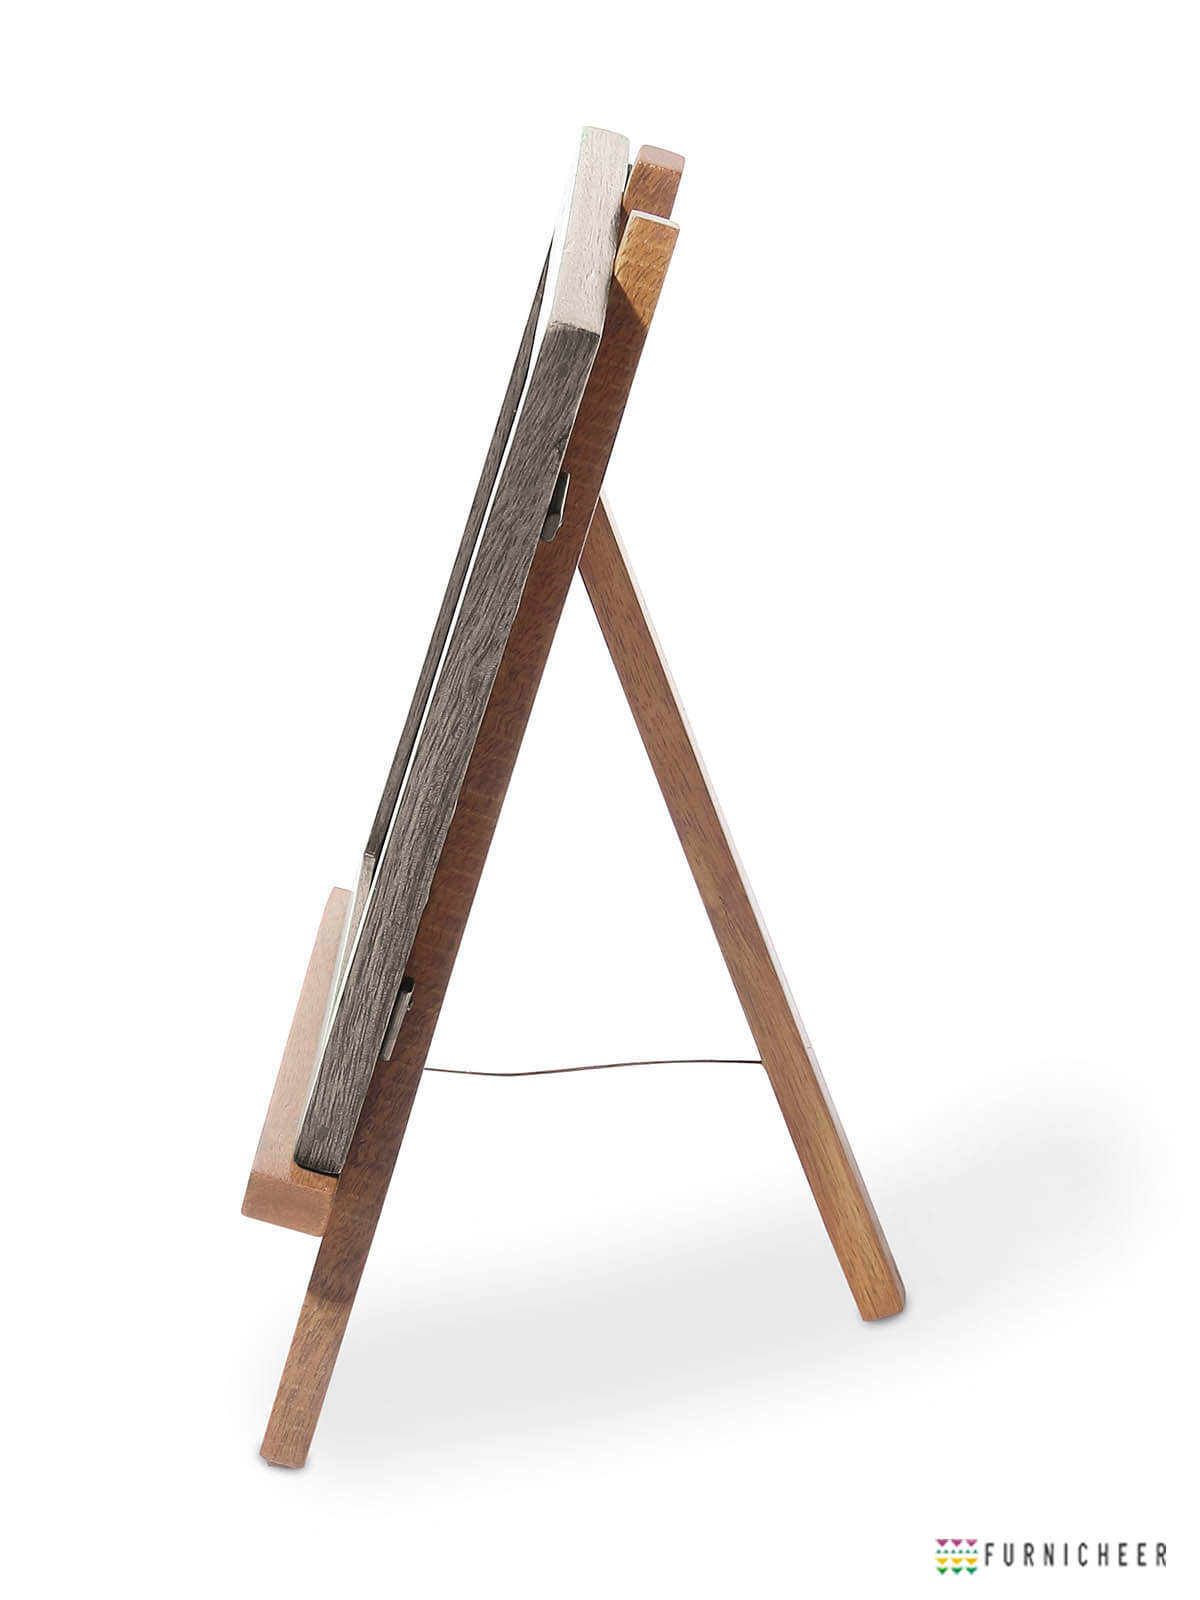 easel stand_11c